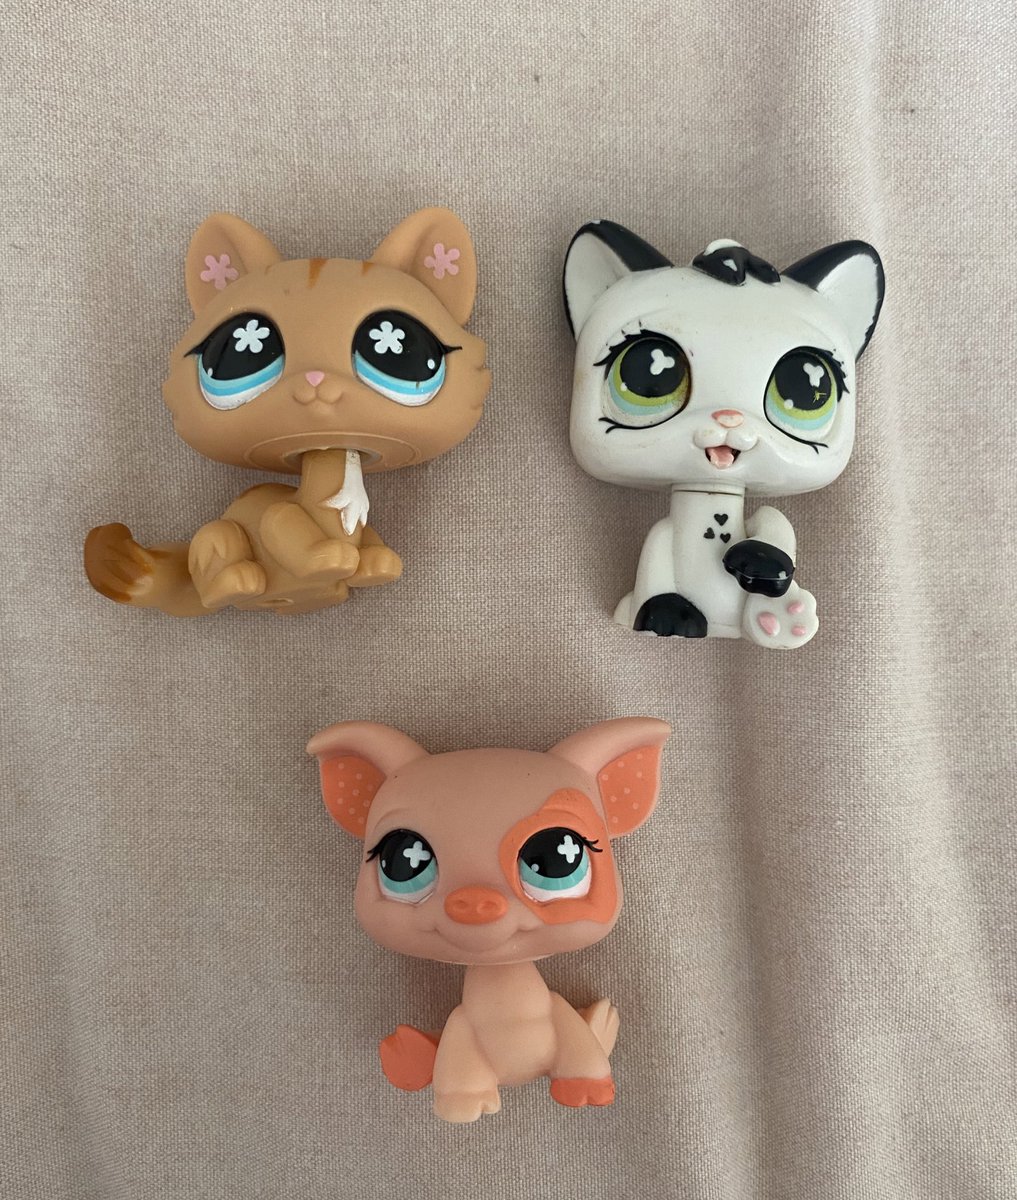 my newest lps,,,, obsessed
#lpstwt #toycollector